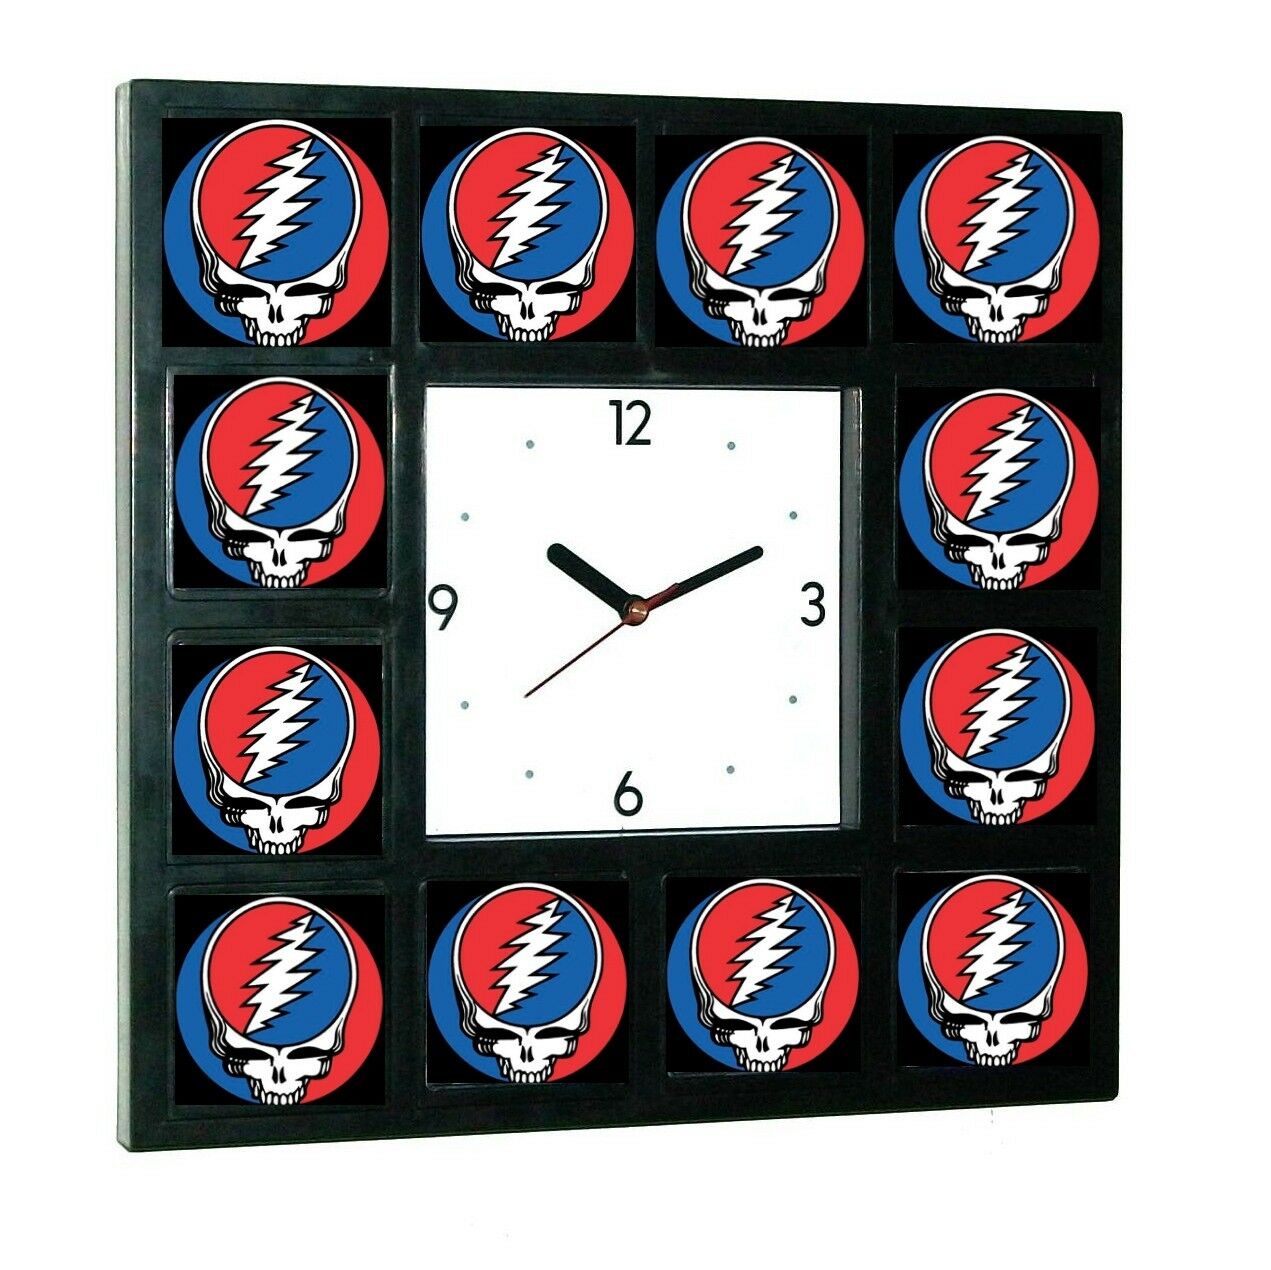 Grateful Dead promo around the Clock with 12 surrounding images